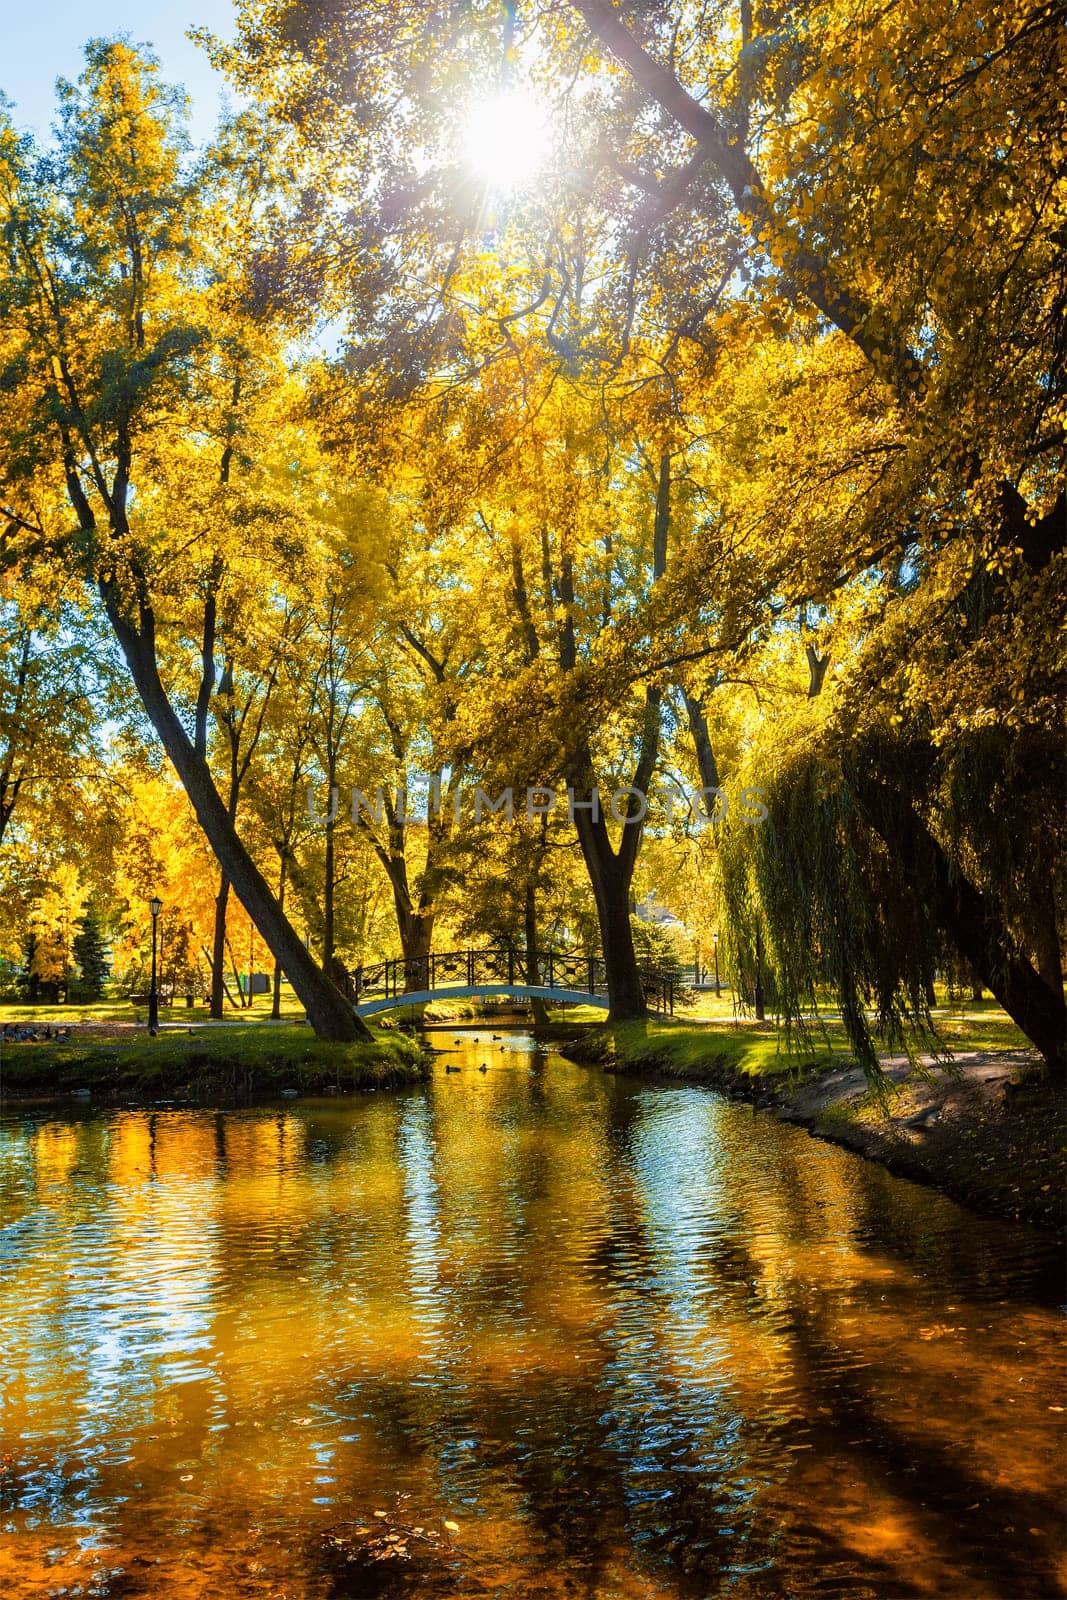 Autumn colors - fall in park with yellow leaves foliage trees reflecting in river water